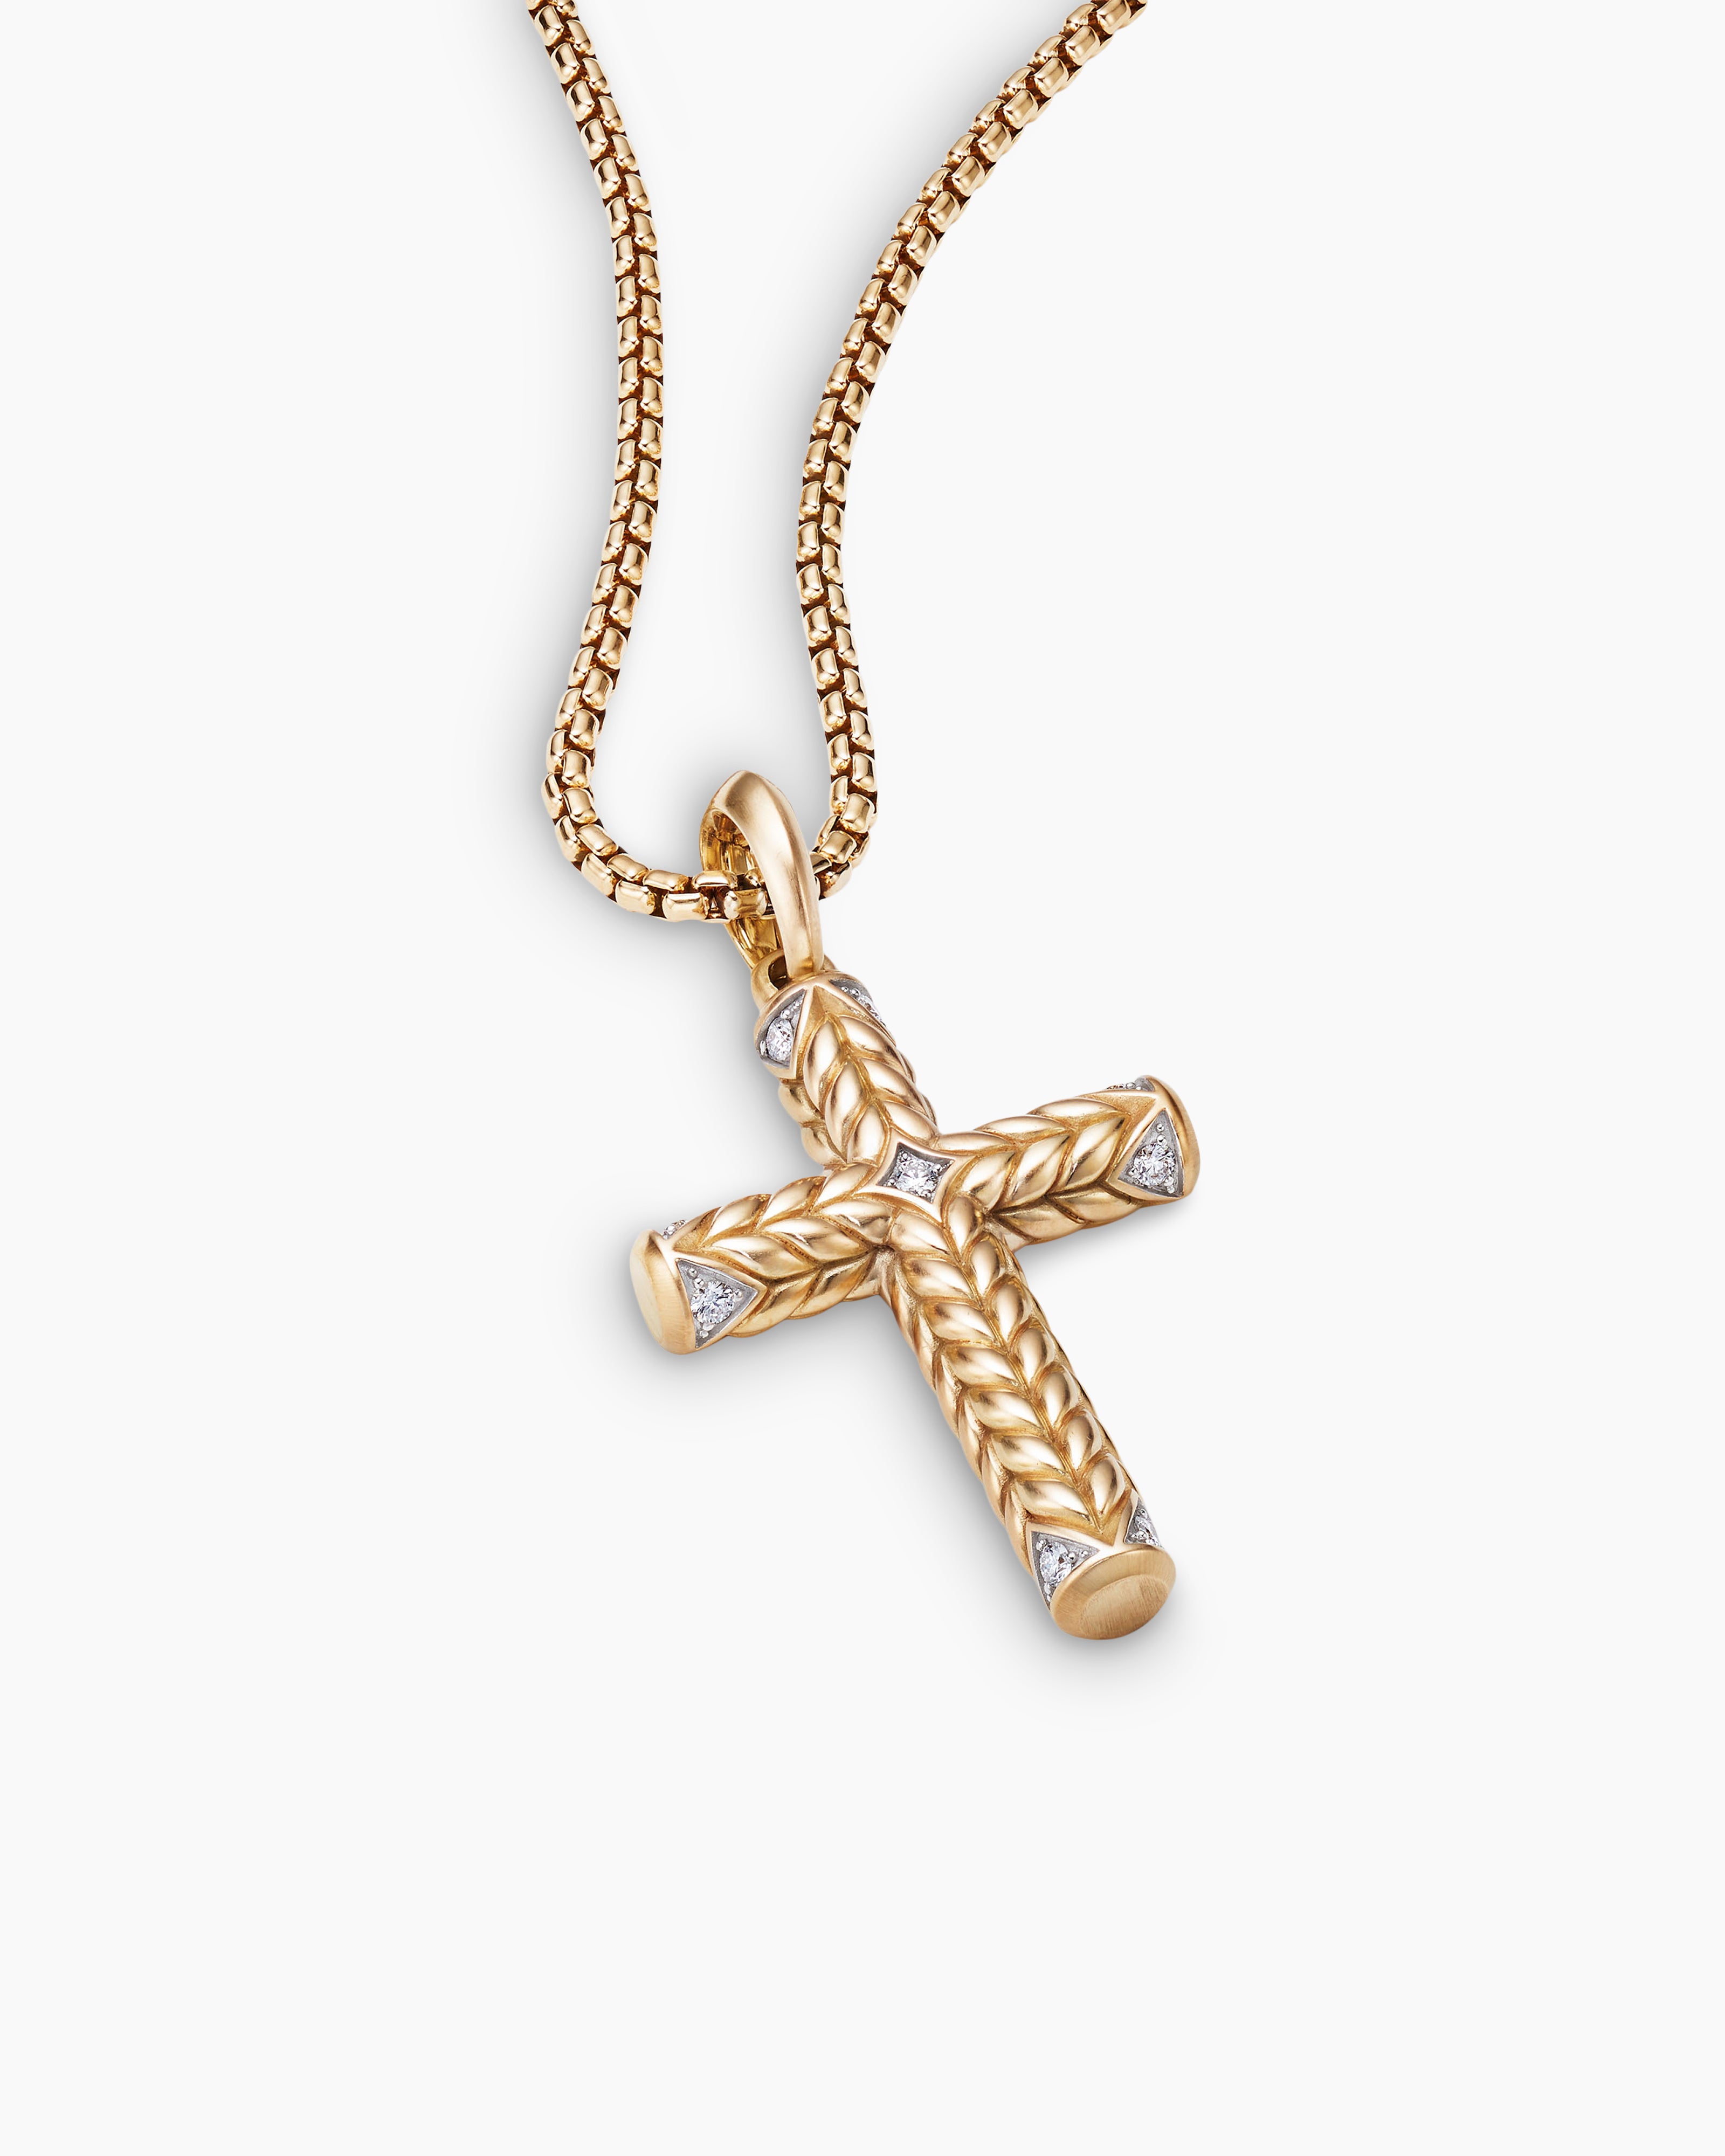 Chevron Sculpted Cross Pendant in 18K Yellow Gold with Diamonds